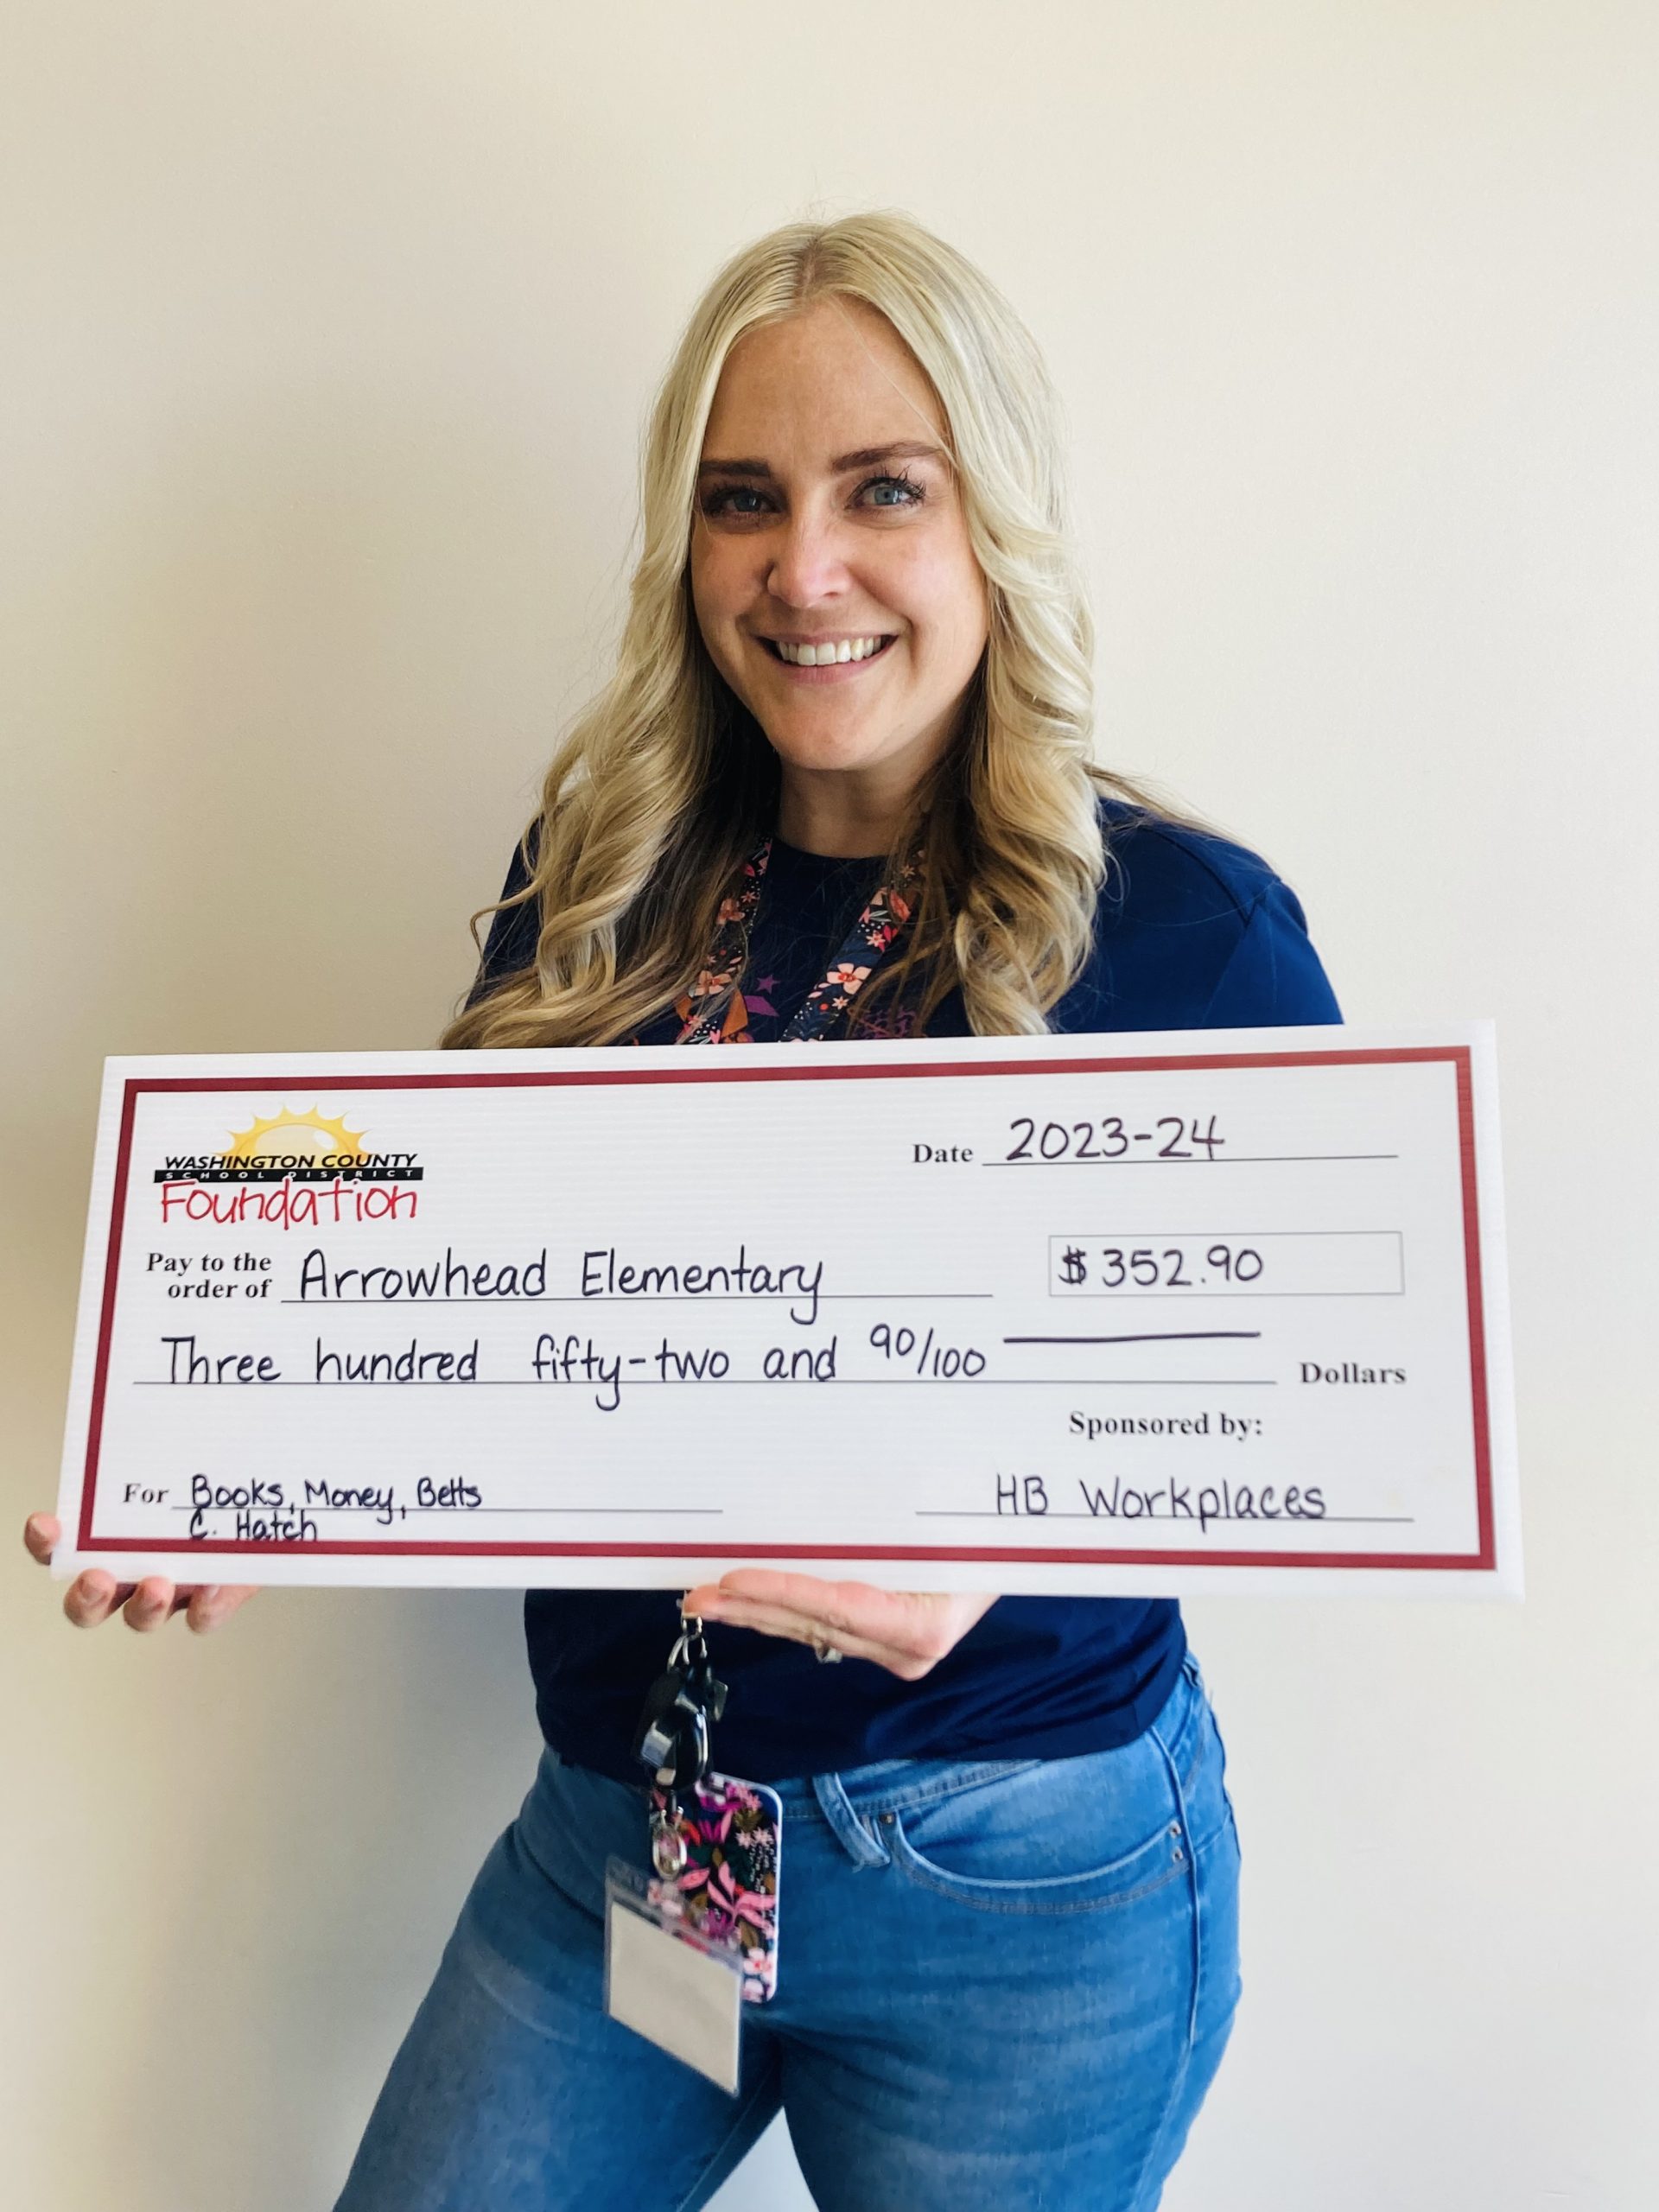 Mrs. Hatch received a Foundation Grant for the 2023-24 school year. Thank you, HB Workplaces, for the books and classroom supplies.